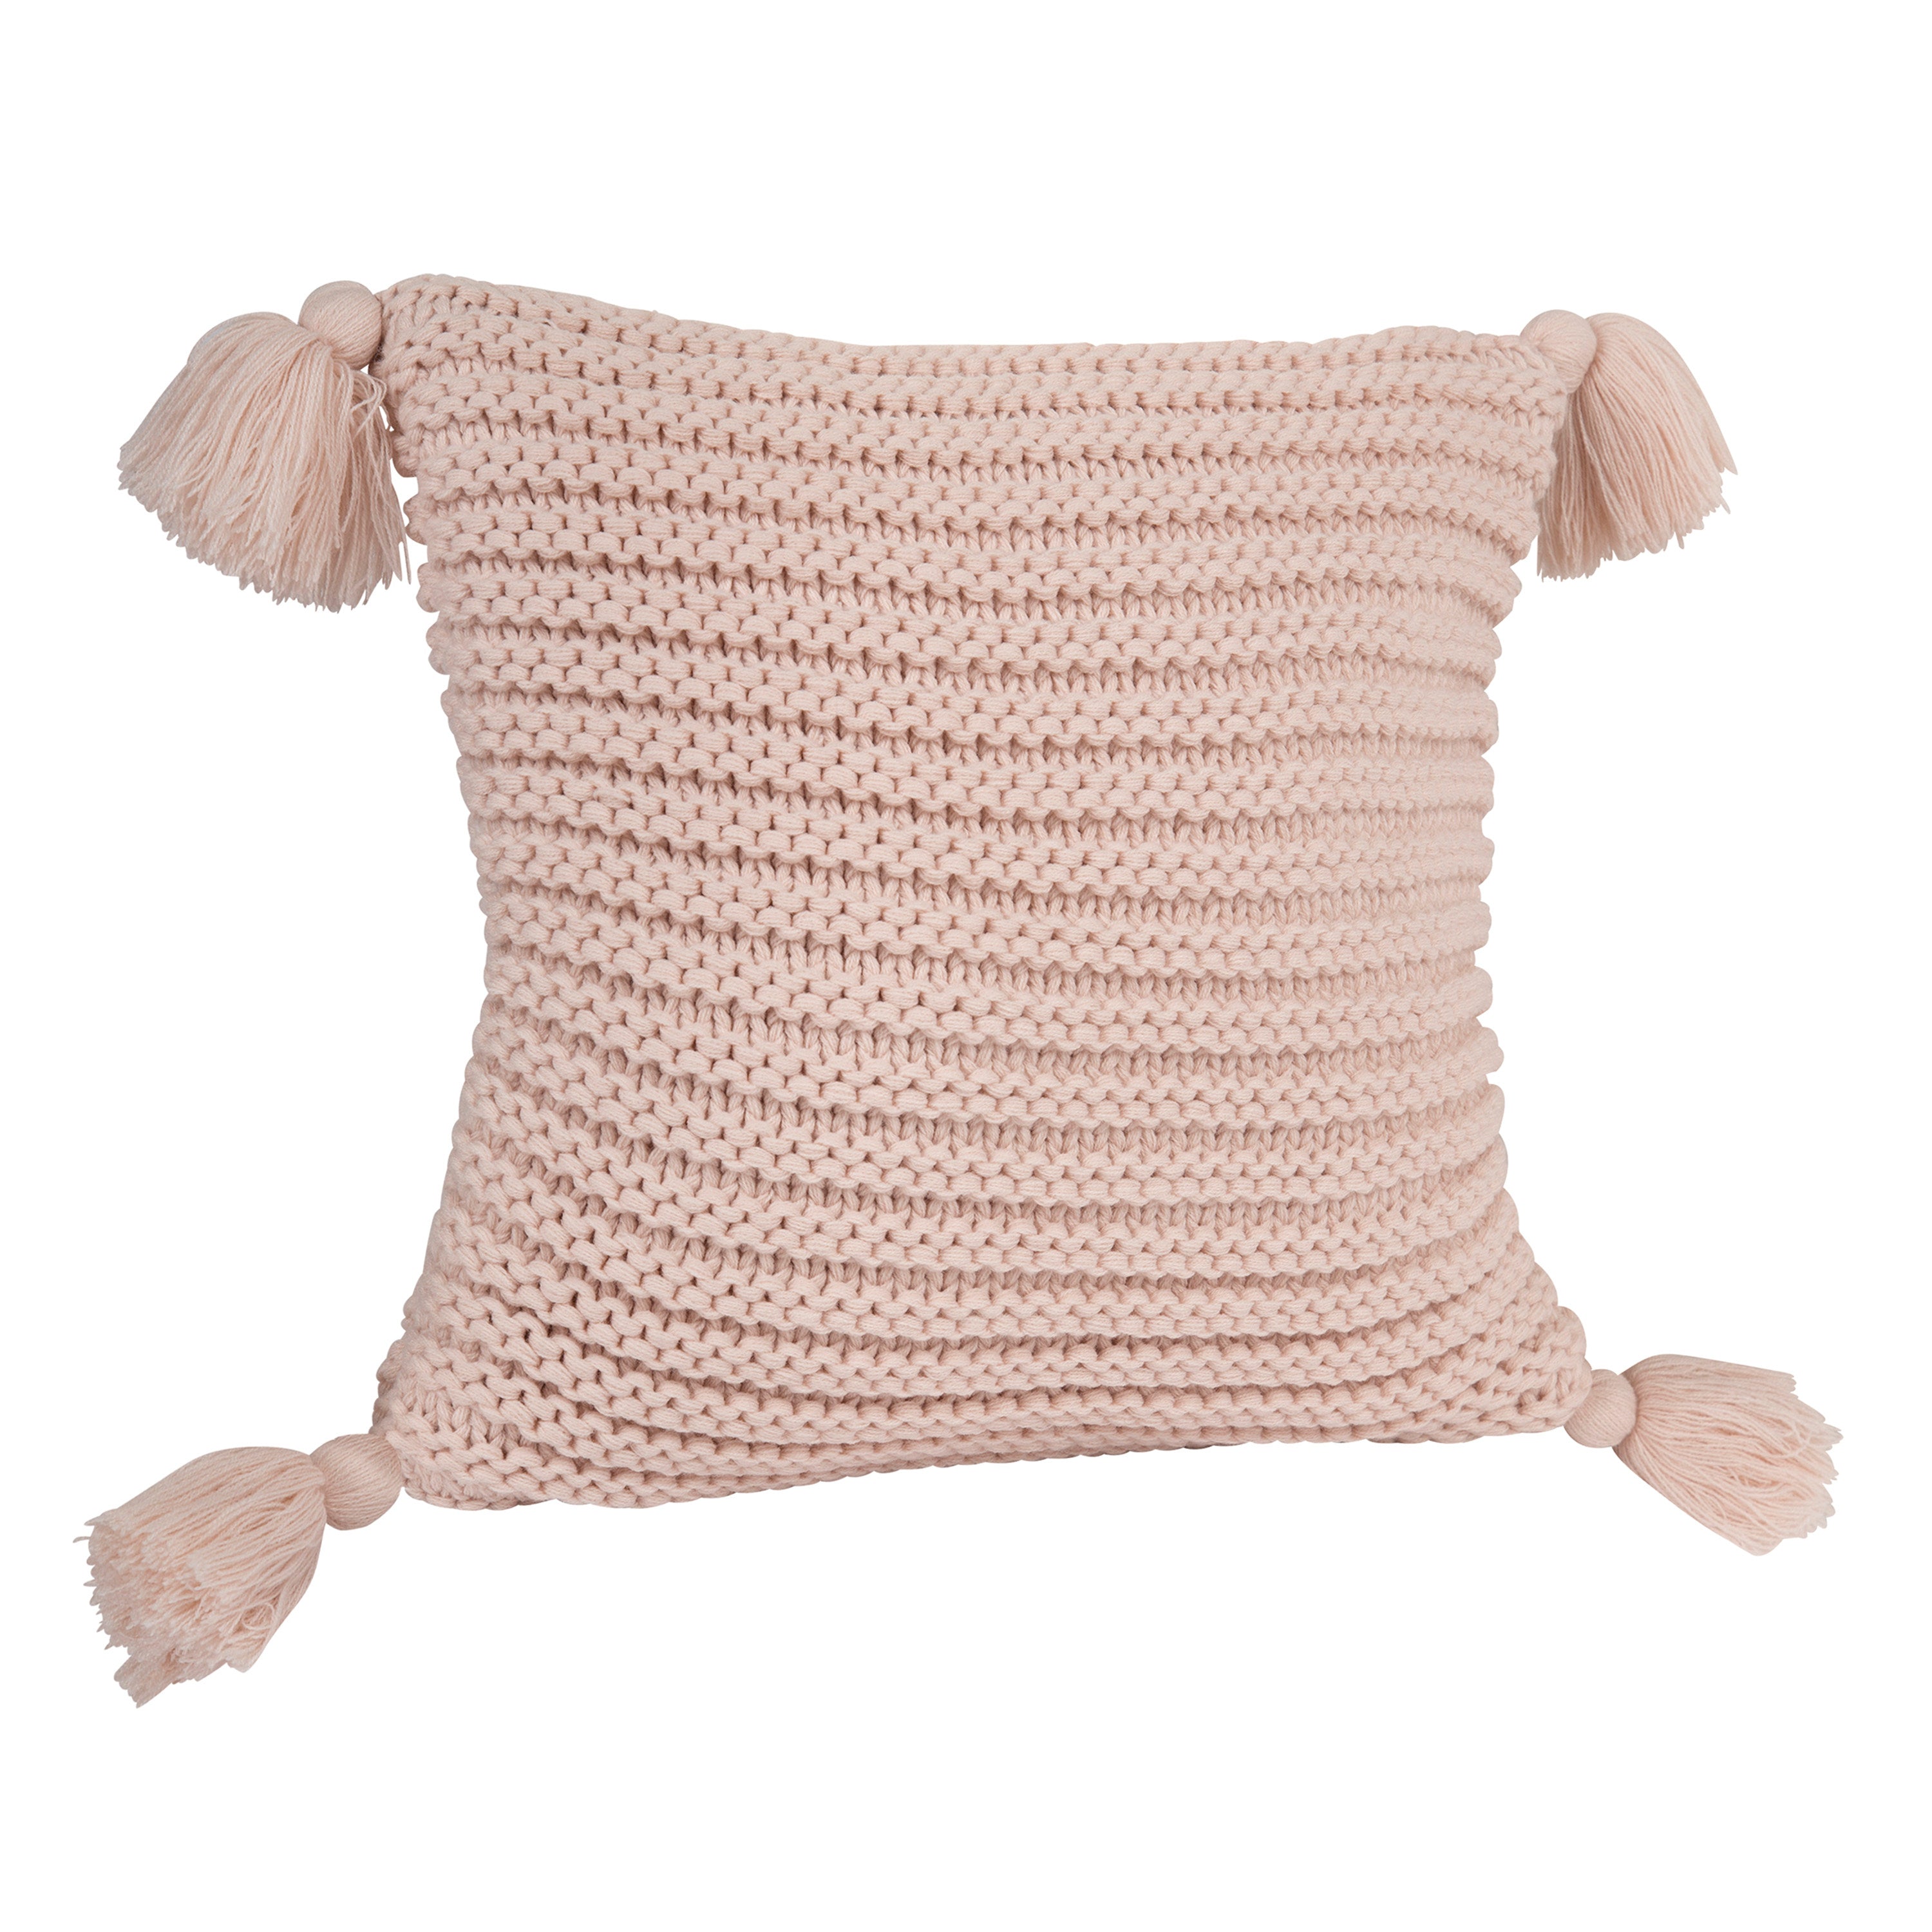 Tassey Large Knit Pillow Cover with Tassels